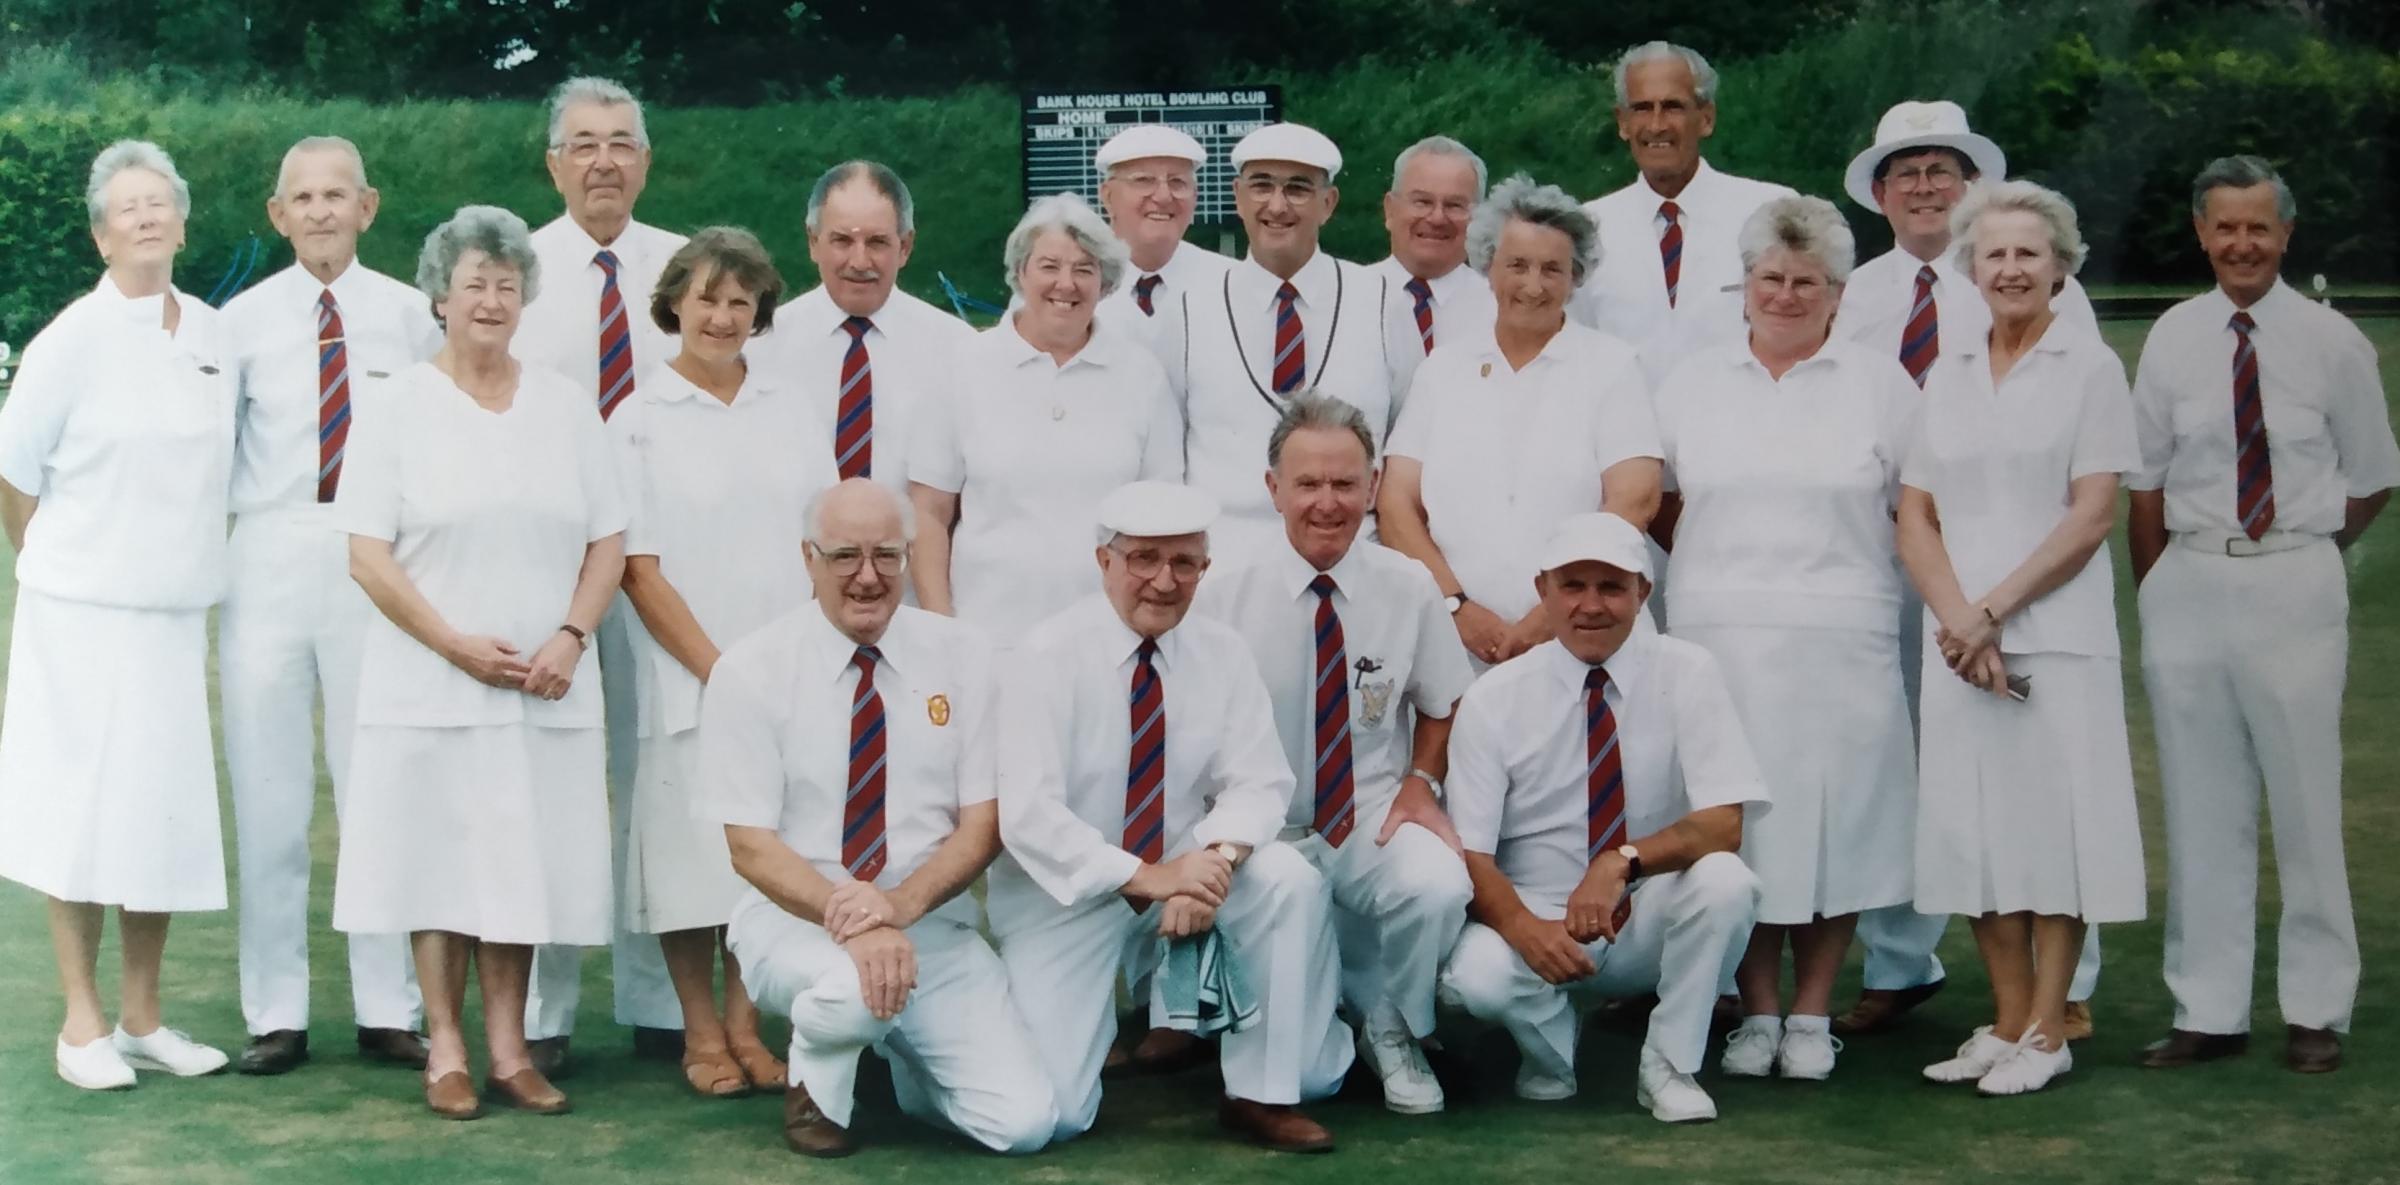 The Bank House Hotel Bowling Club pictured in June 2001